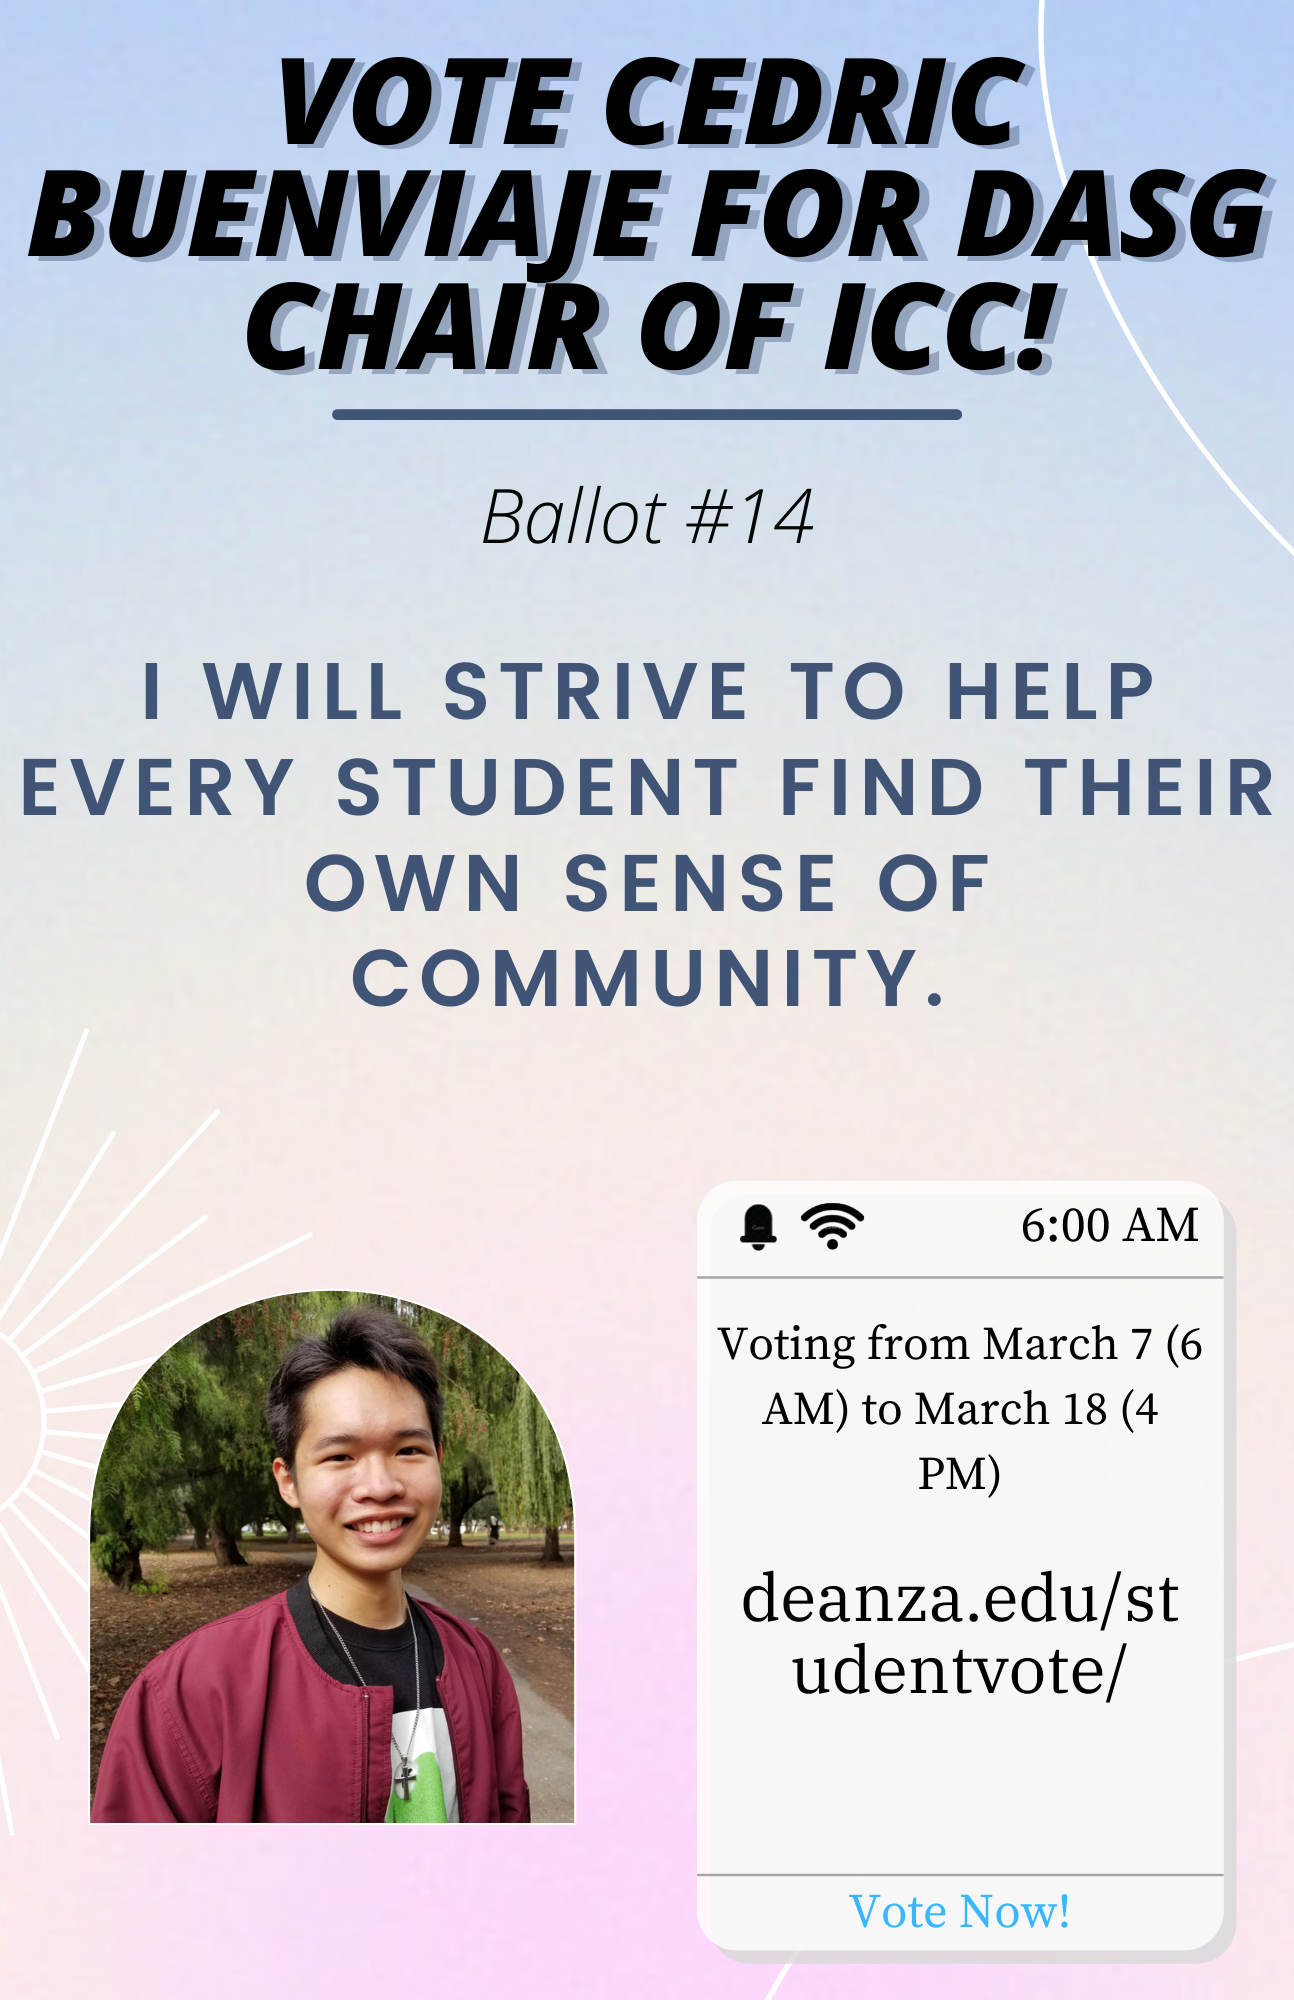 Vote Cedric Buenviaje for DASG Chair of ICC! - Ballot #14 - I will strive to help every student find their own sense of community. - Voting from March 7 (6 AM) to March 18 (4 PM) - https://www.deanza.edu/studentvote/ - Vote Now!